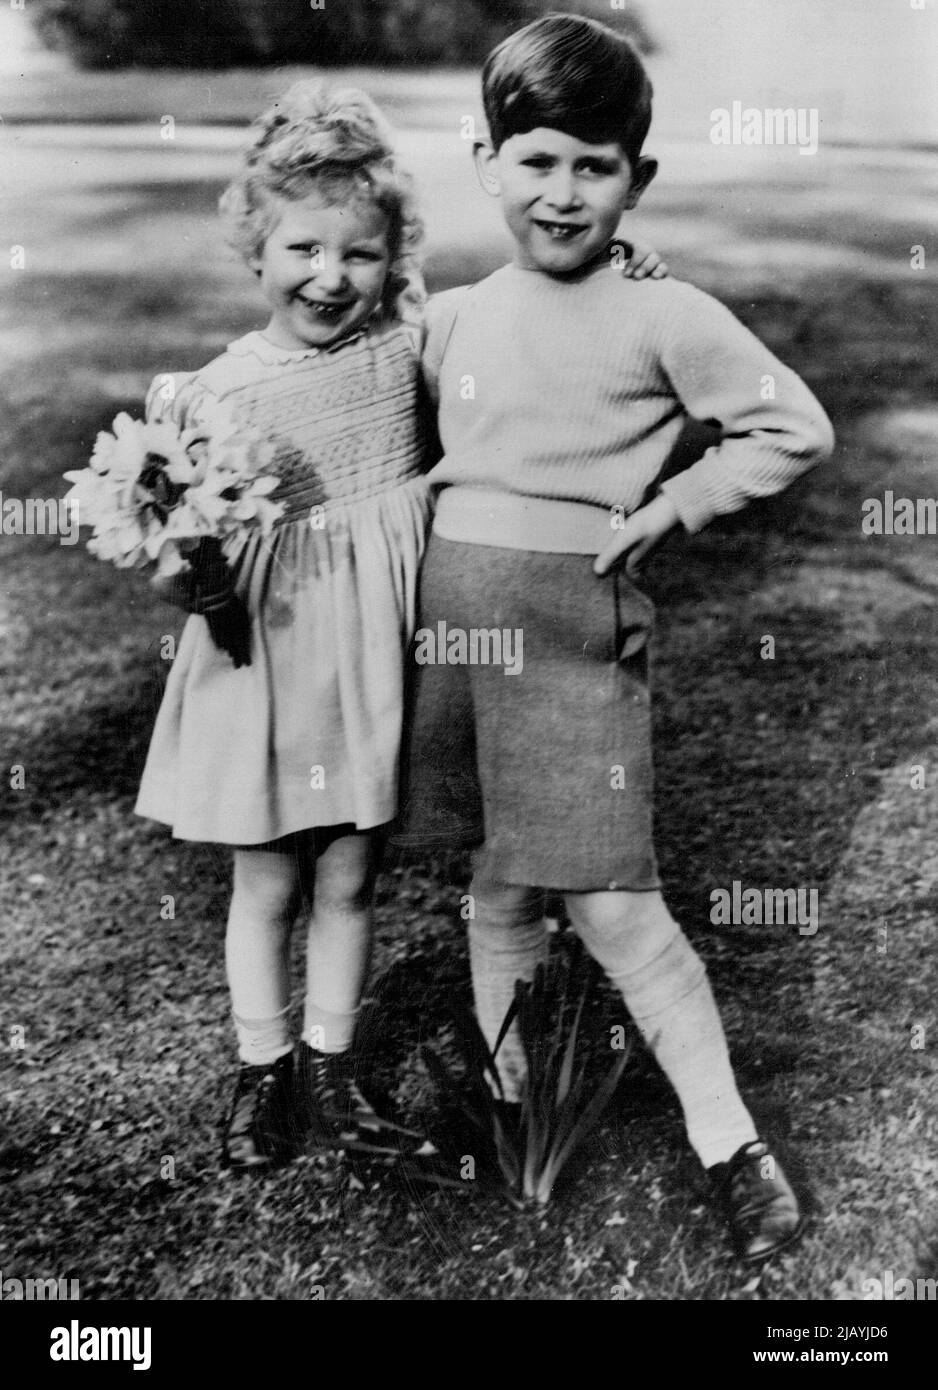 Prince Charles & Princess Anne - Together 1950 To 1960 - British Royalty. May 07, 1954. (Photo by Lisa Studios). Stock Photo